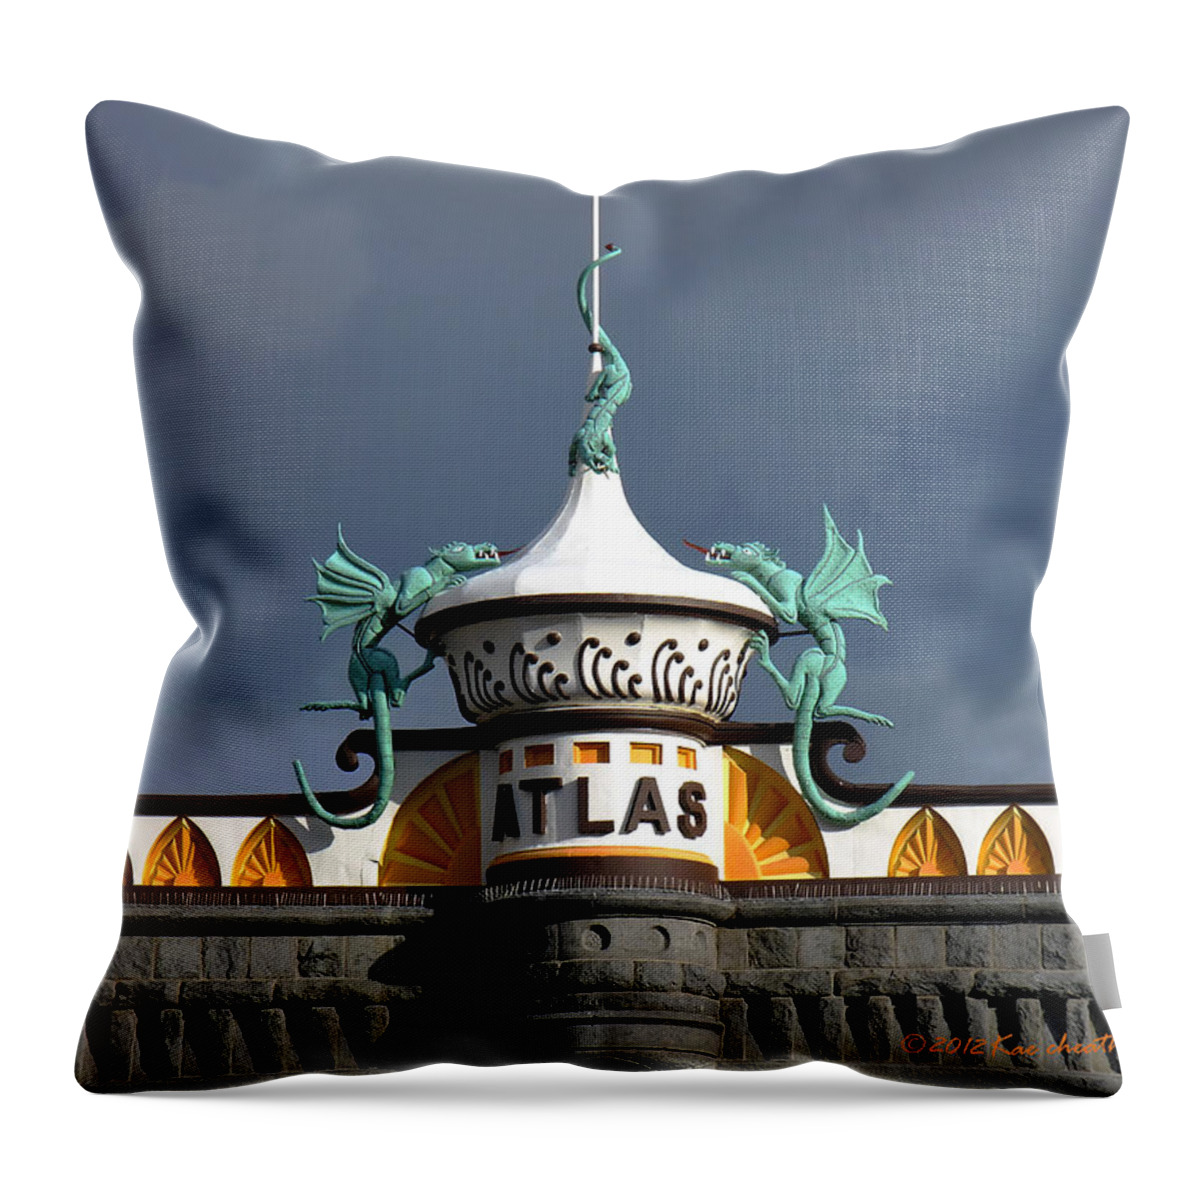 Architecture Throw Pillow featuring the photograph Atlas Building by Kae Cheatham